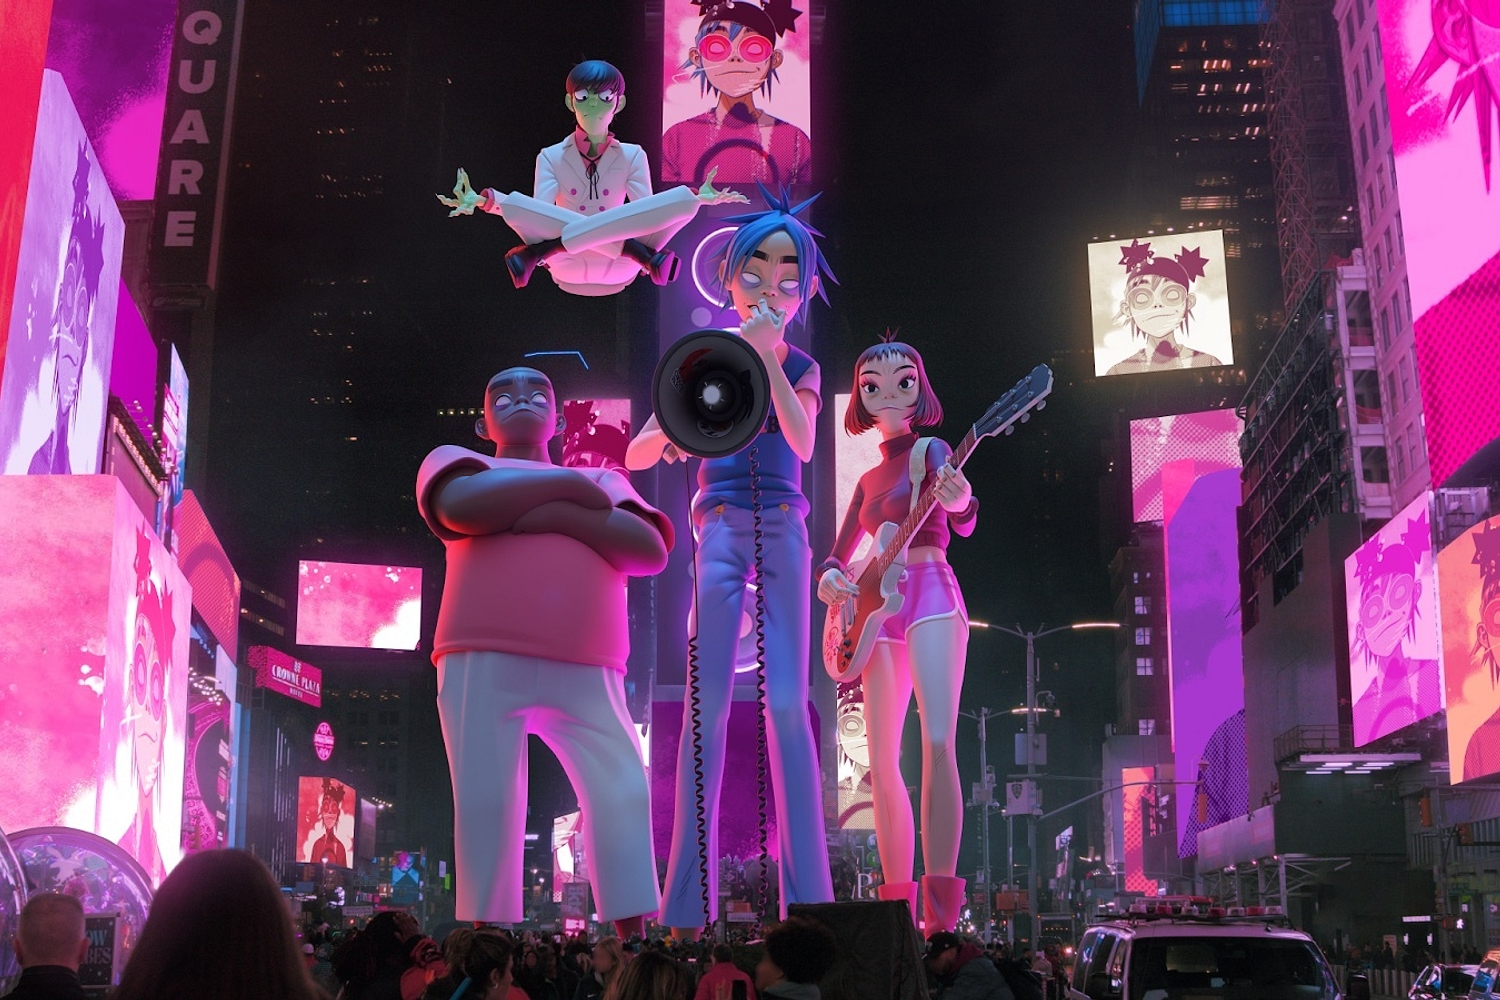 Gorillaz will perform new track ‘Skinny Ape’ in New York’s Times Square and London’s Piccadilly Circus this month